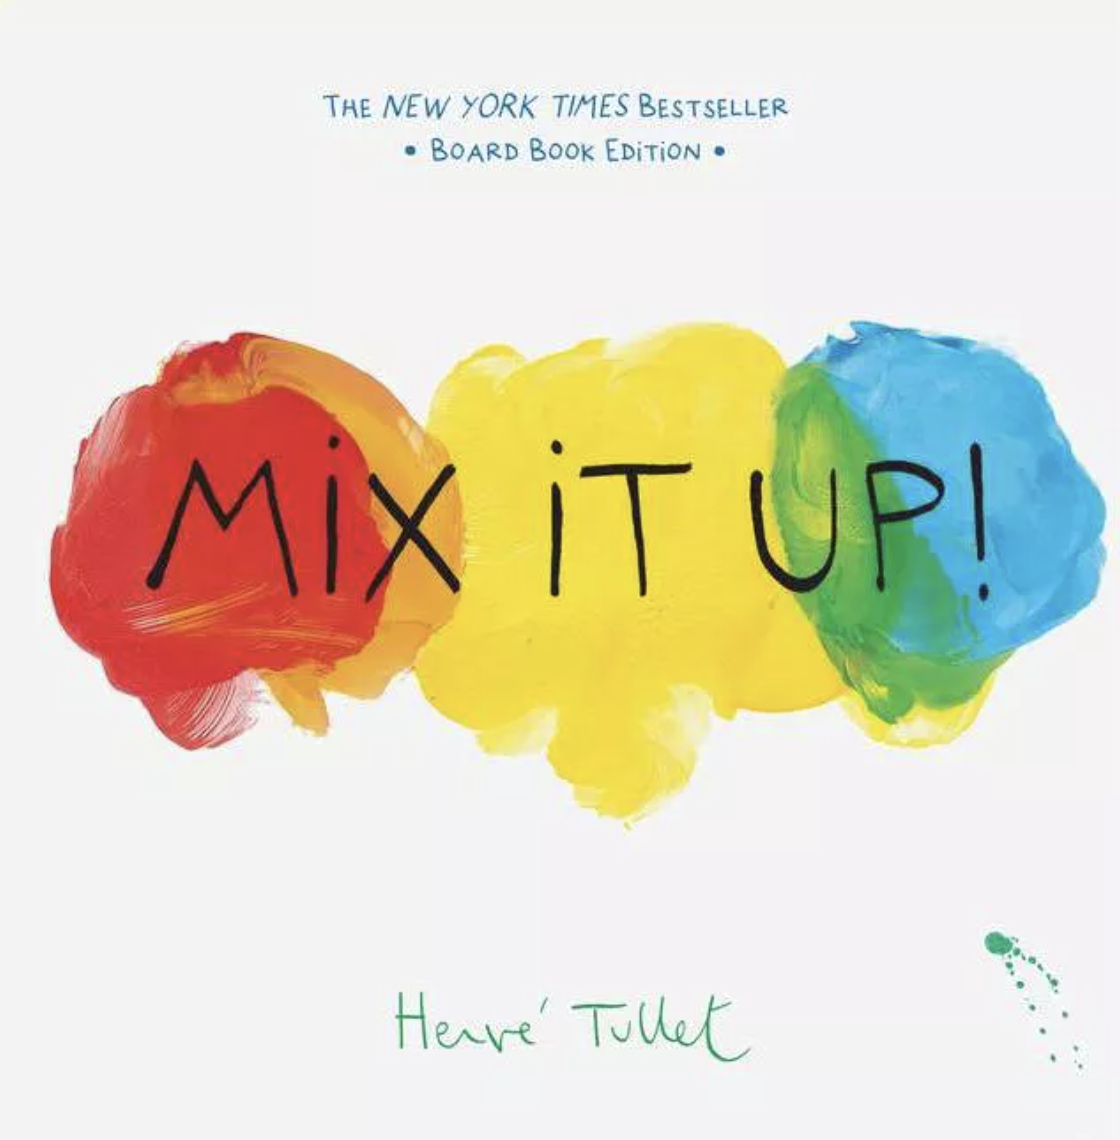 Image for "Mix It Up"